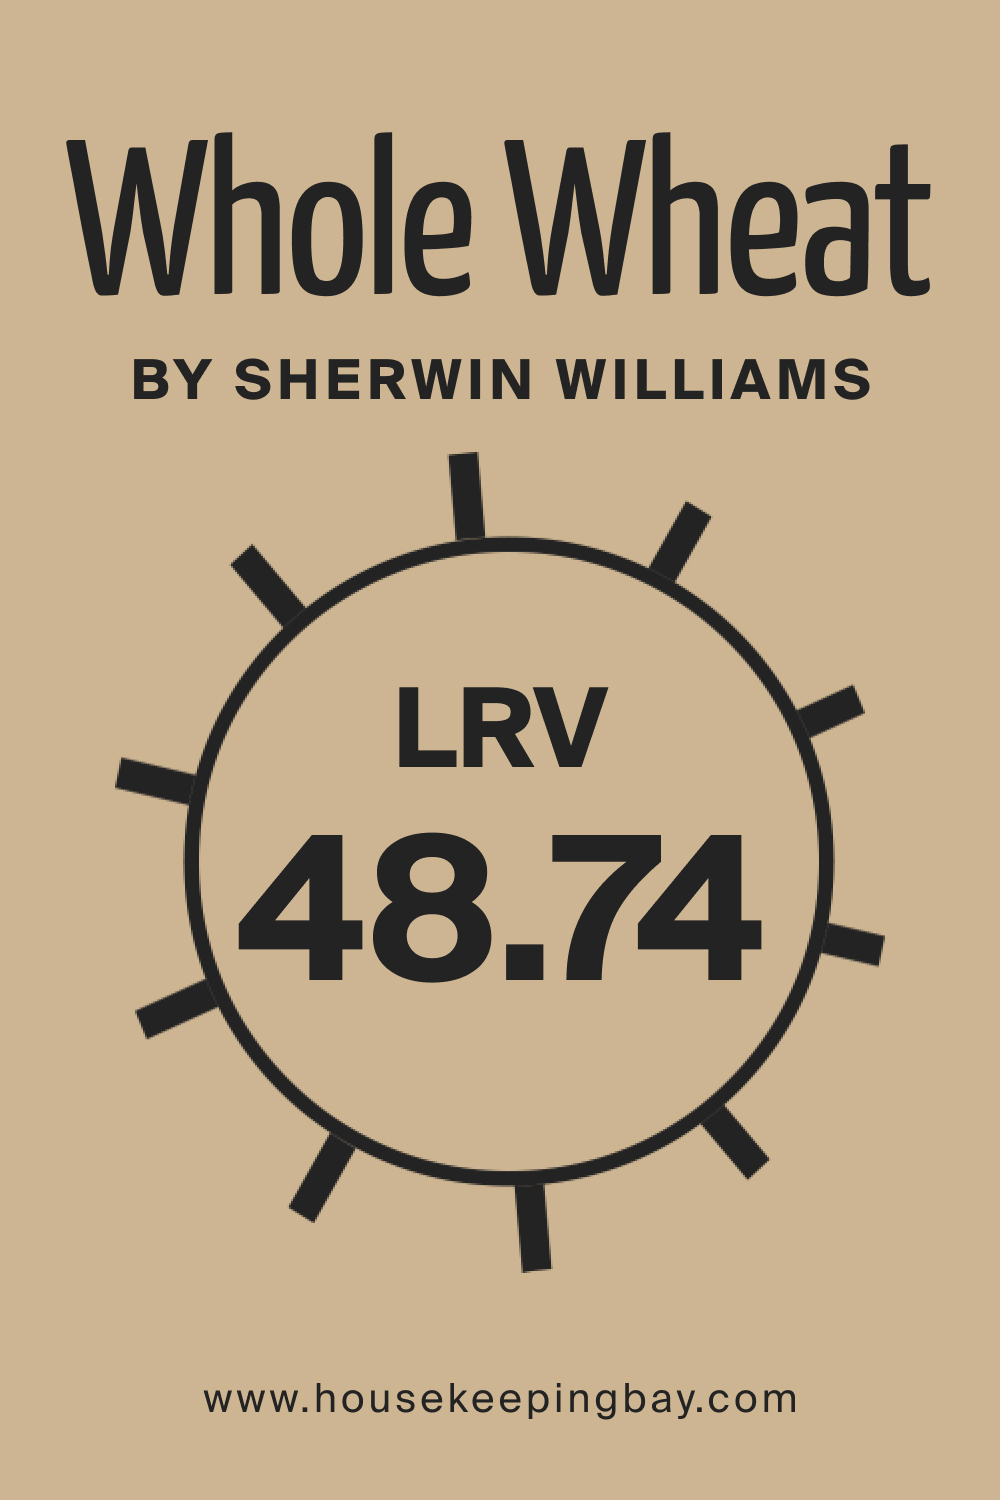 SW Whole Wheat by Sherwin Williams. LRV – 48.74